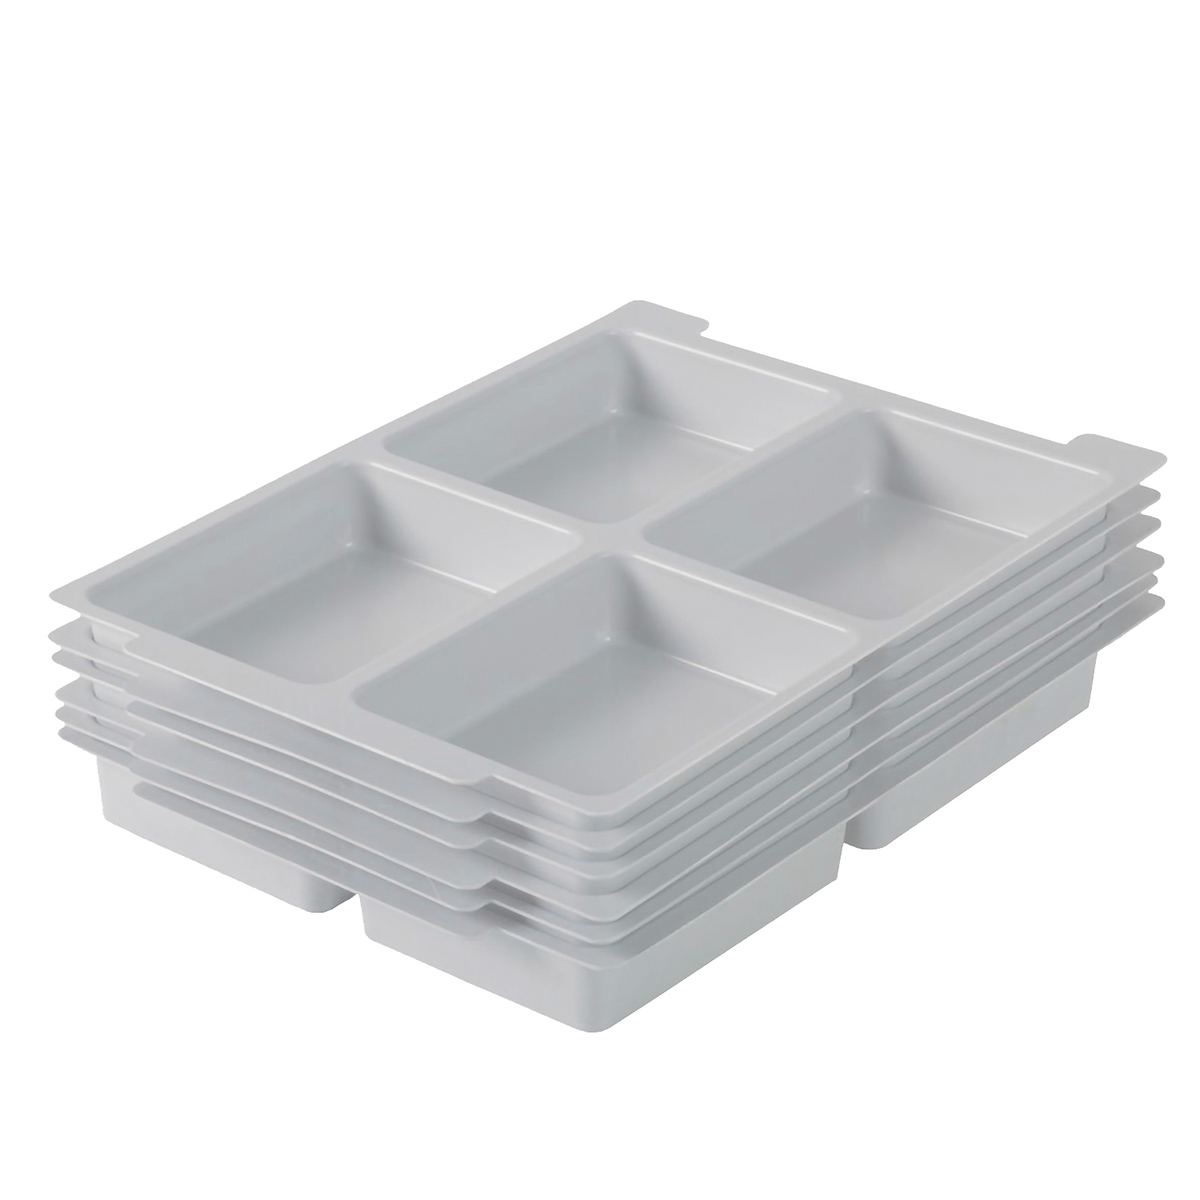 Gratnells Molded 4-Section Insert for Shallow F1 Tray, Dove Grey, Pack of 6